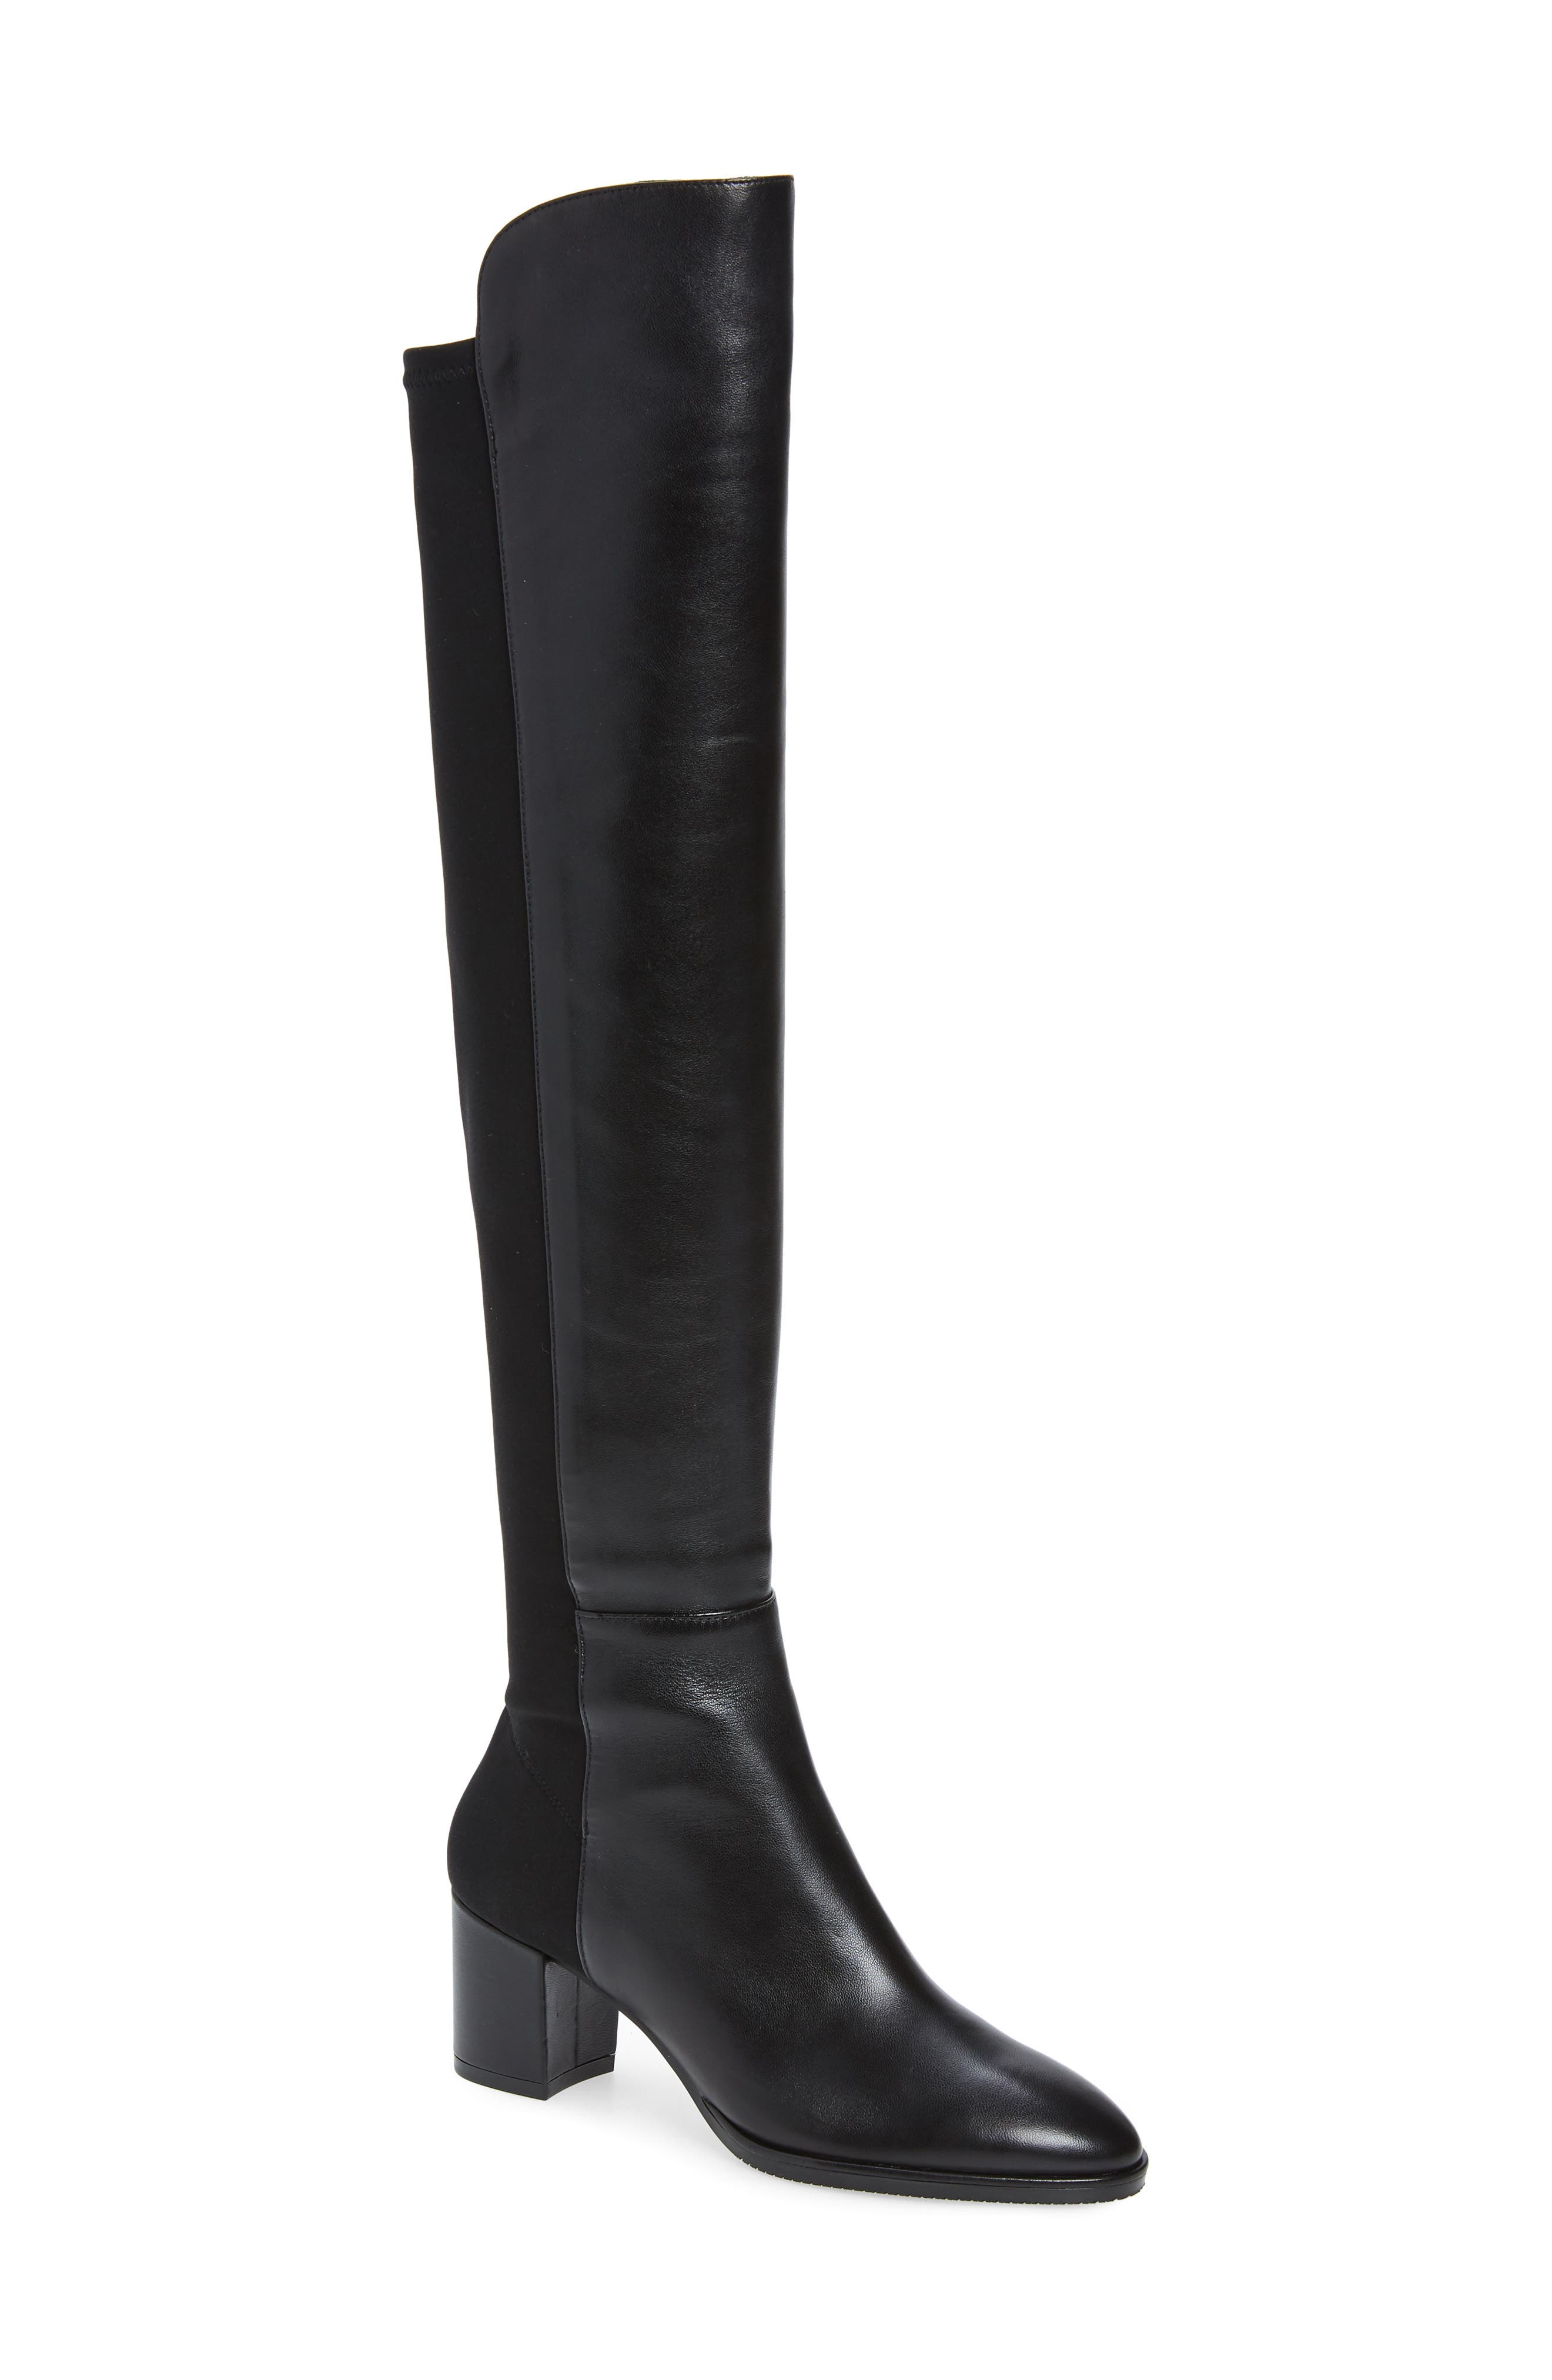 high knee boots size 4